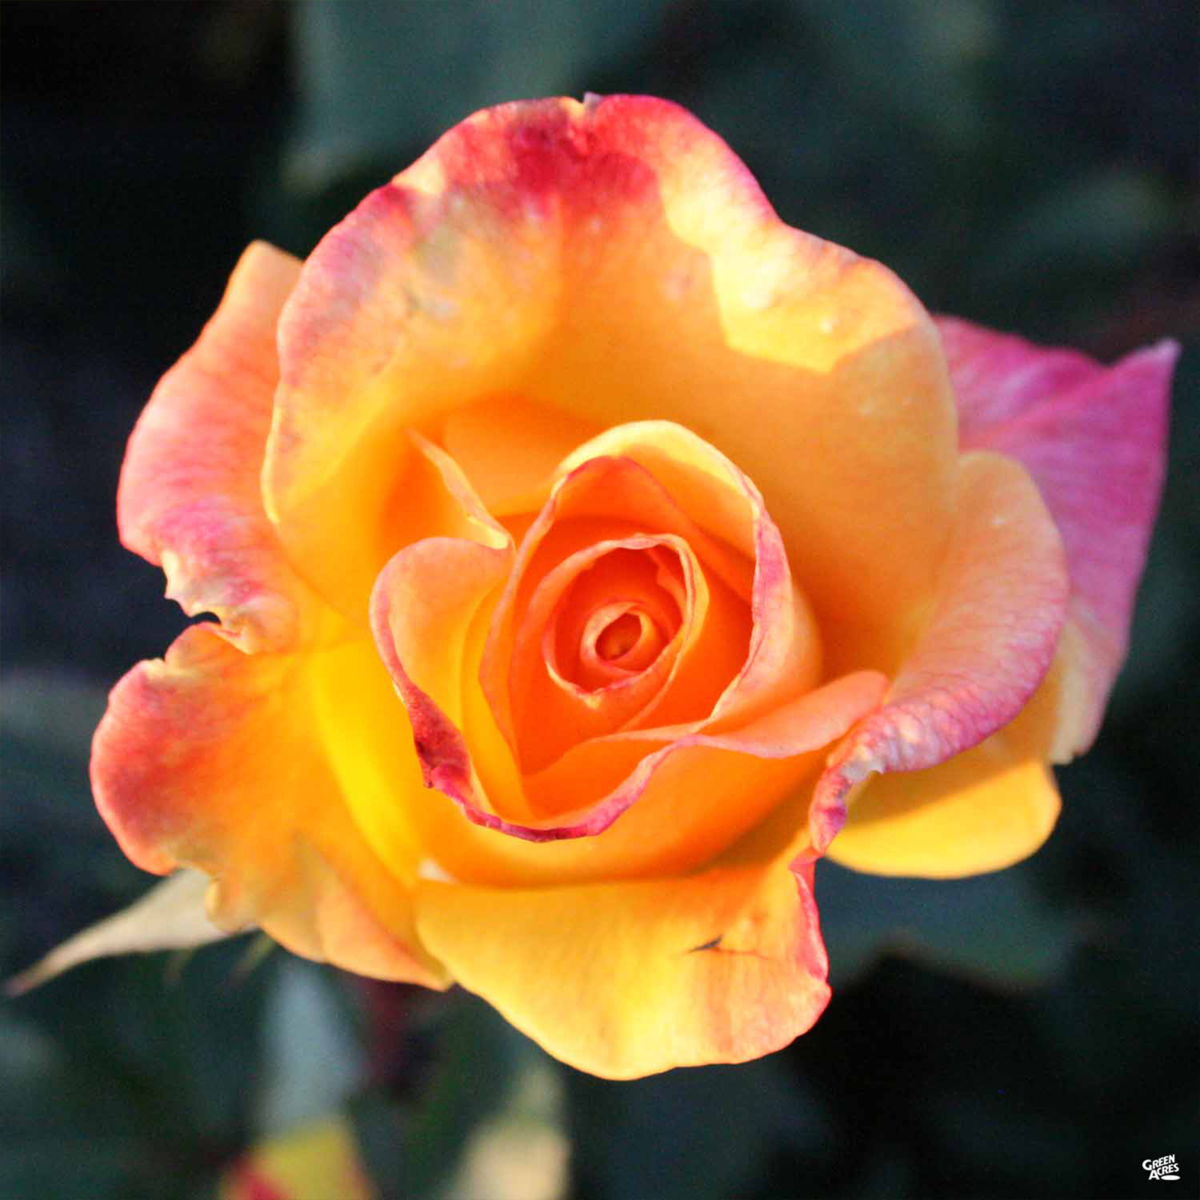 Rio Samba Rose that has vibrant colors of pink, orange and red.